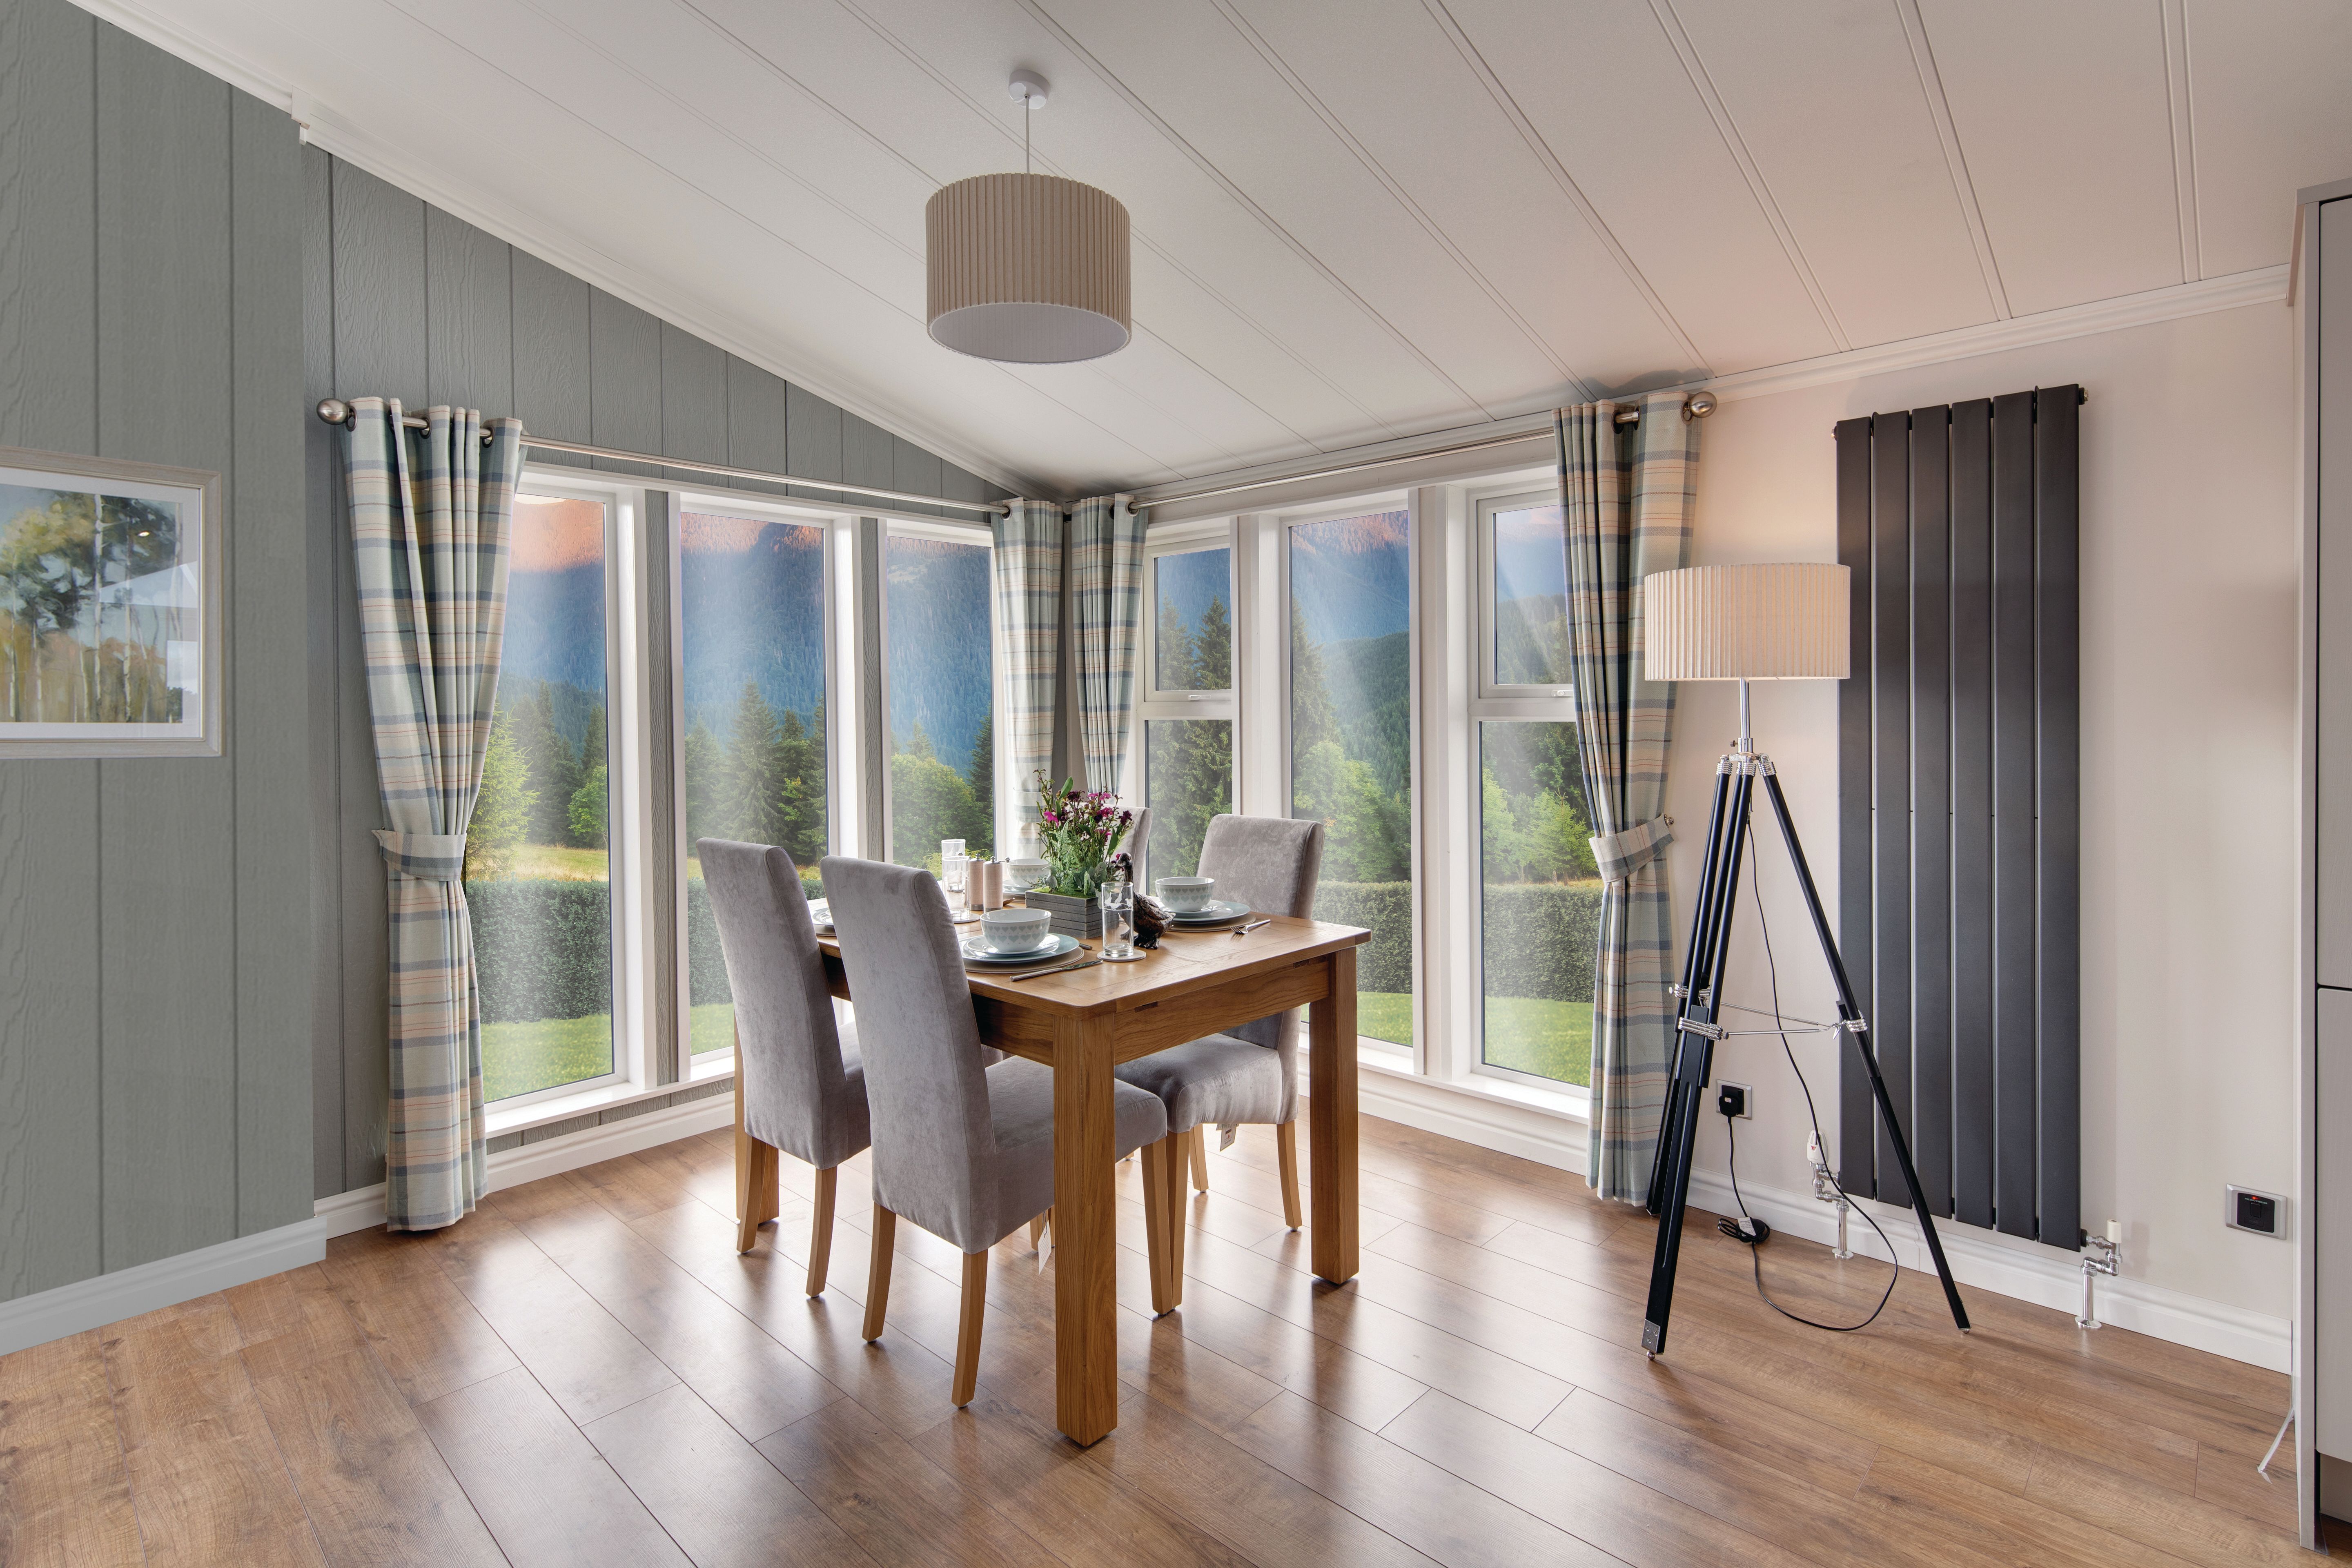 The Acorn Willerby Bespoke lodge dining